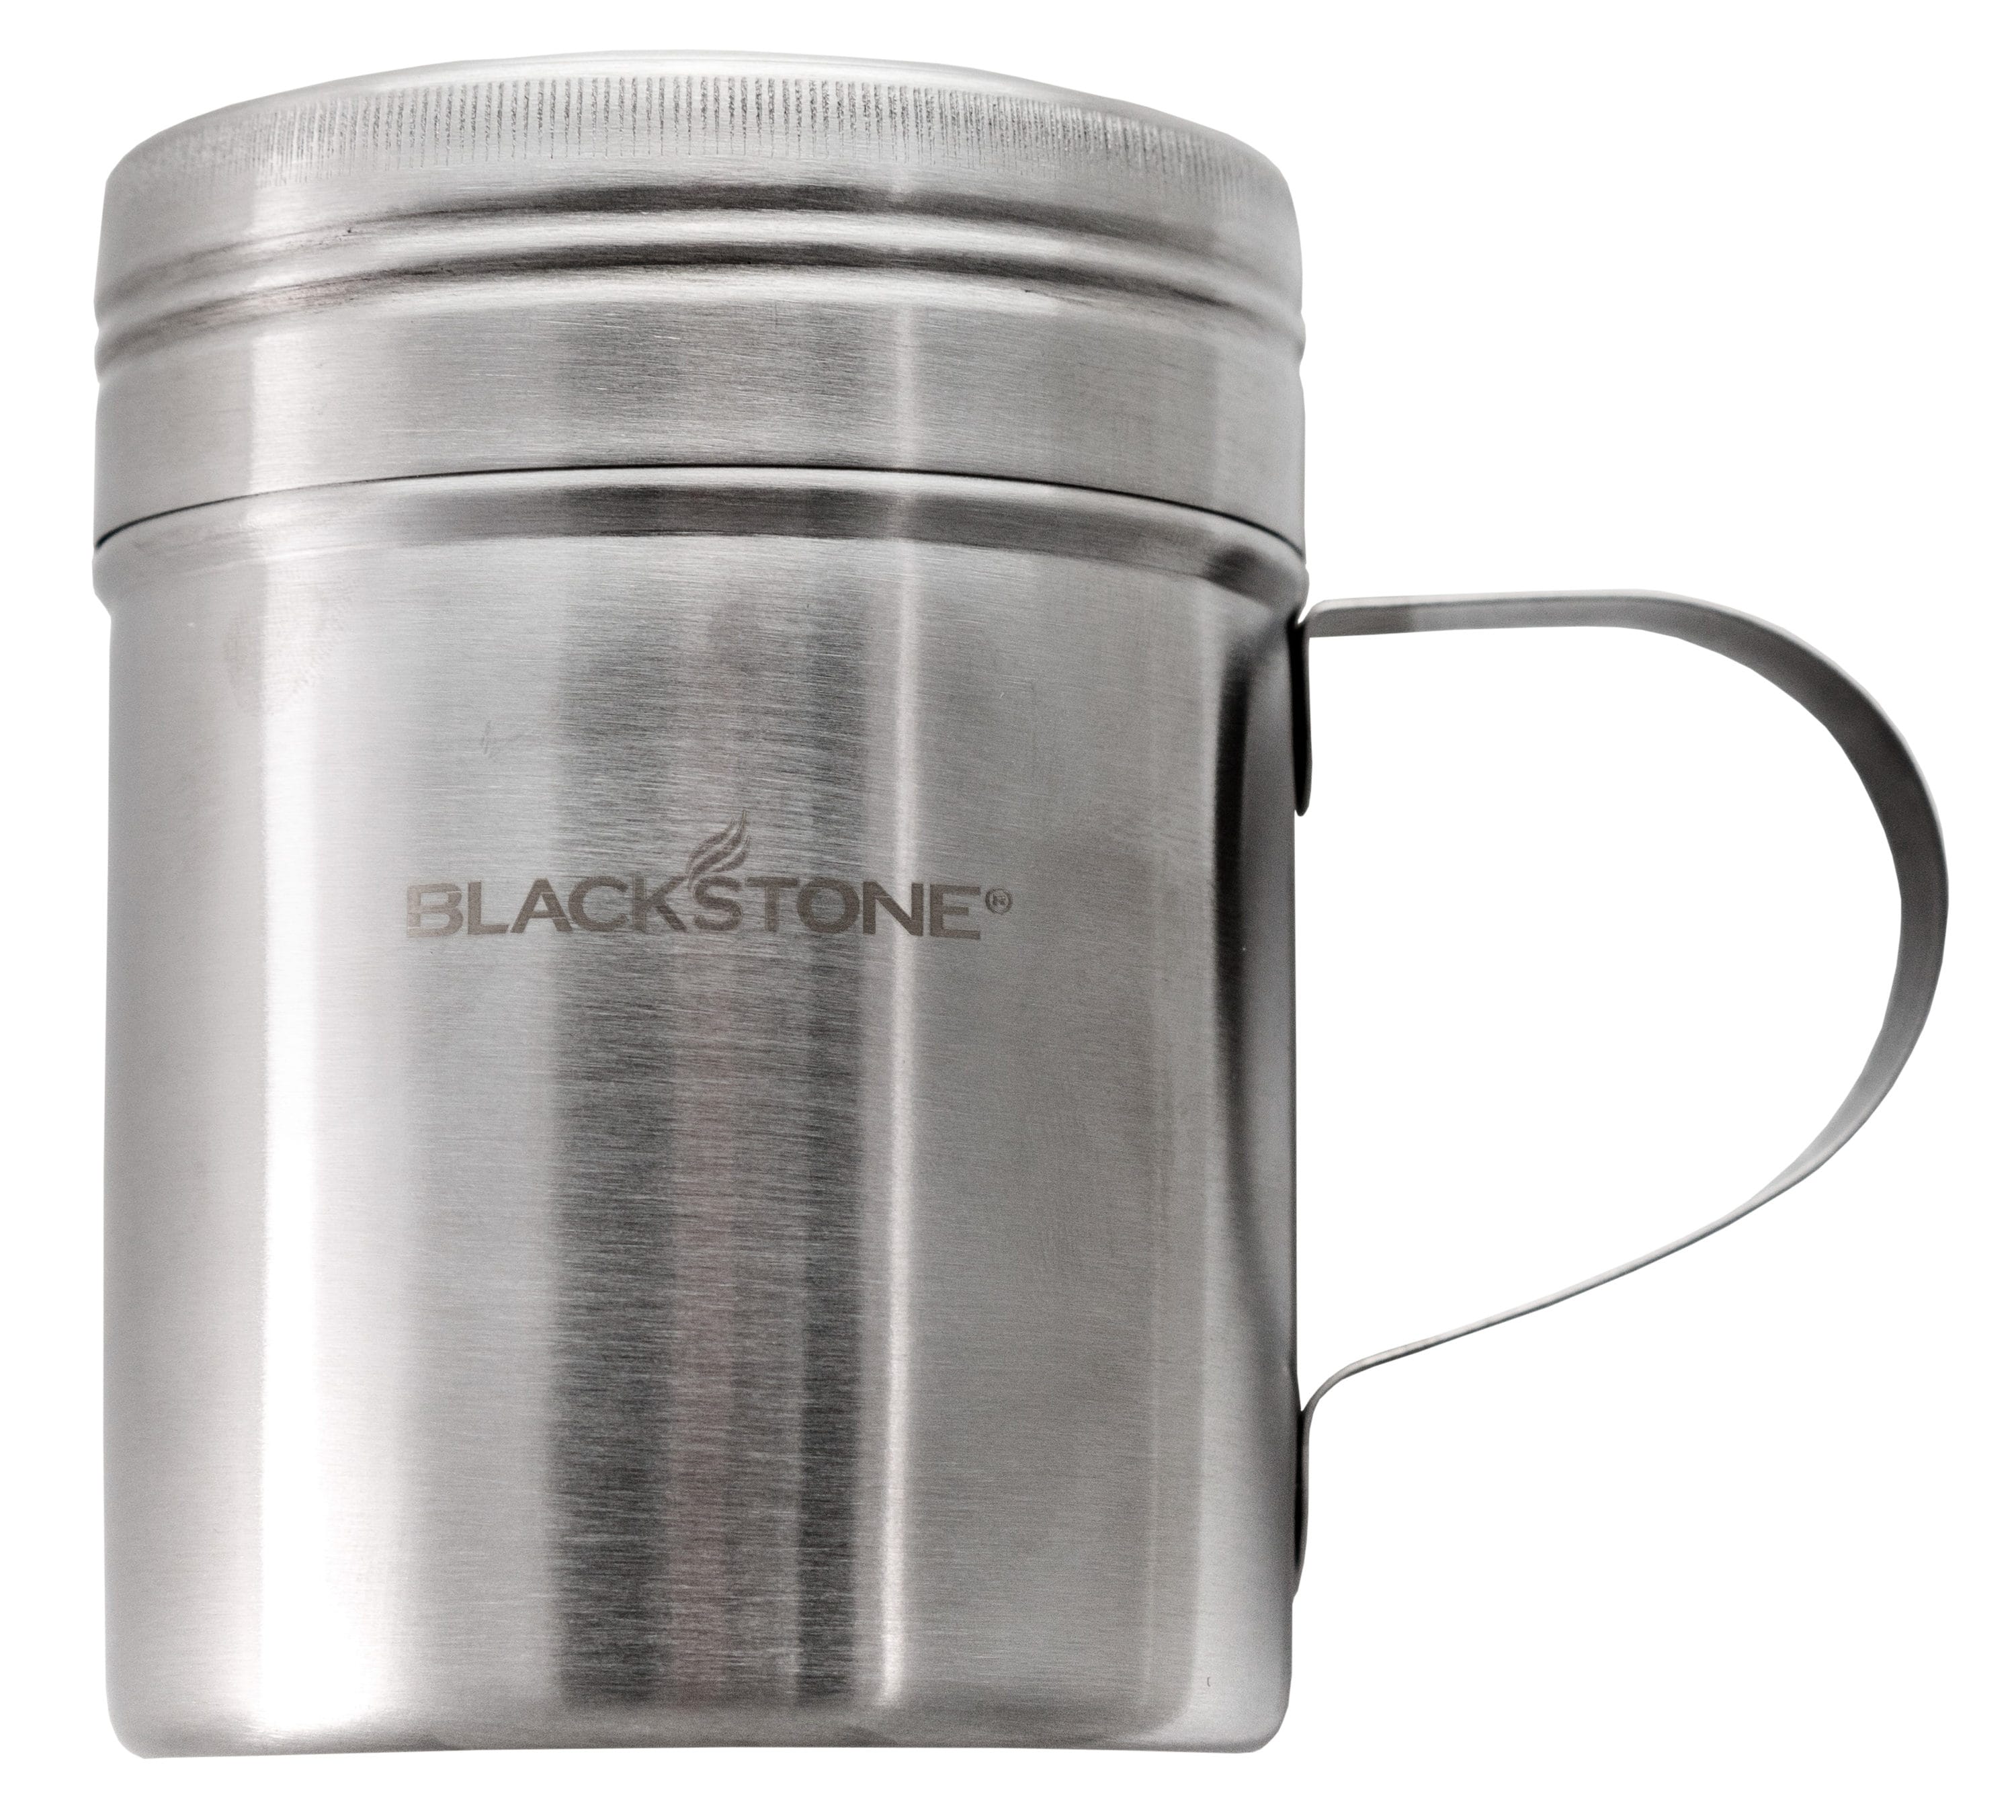 2 PACK Black and White Shaker Cup Insulated Stainless Steel 